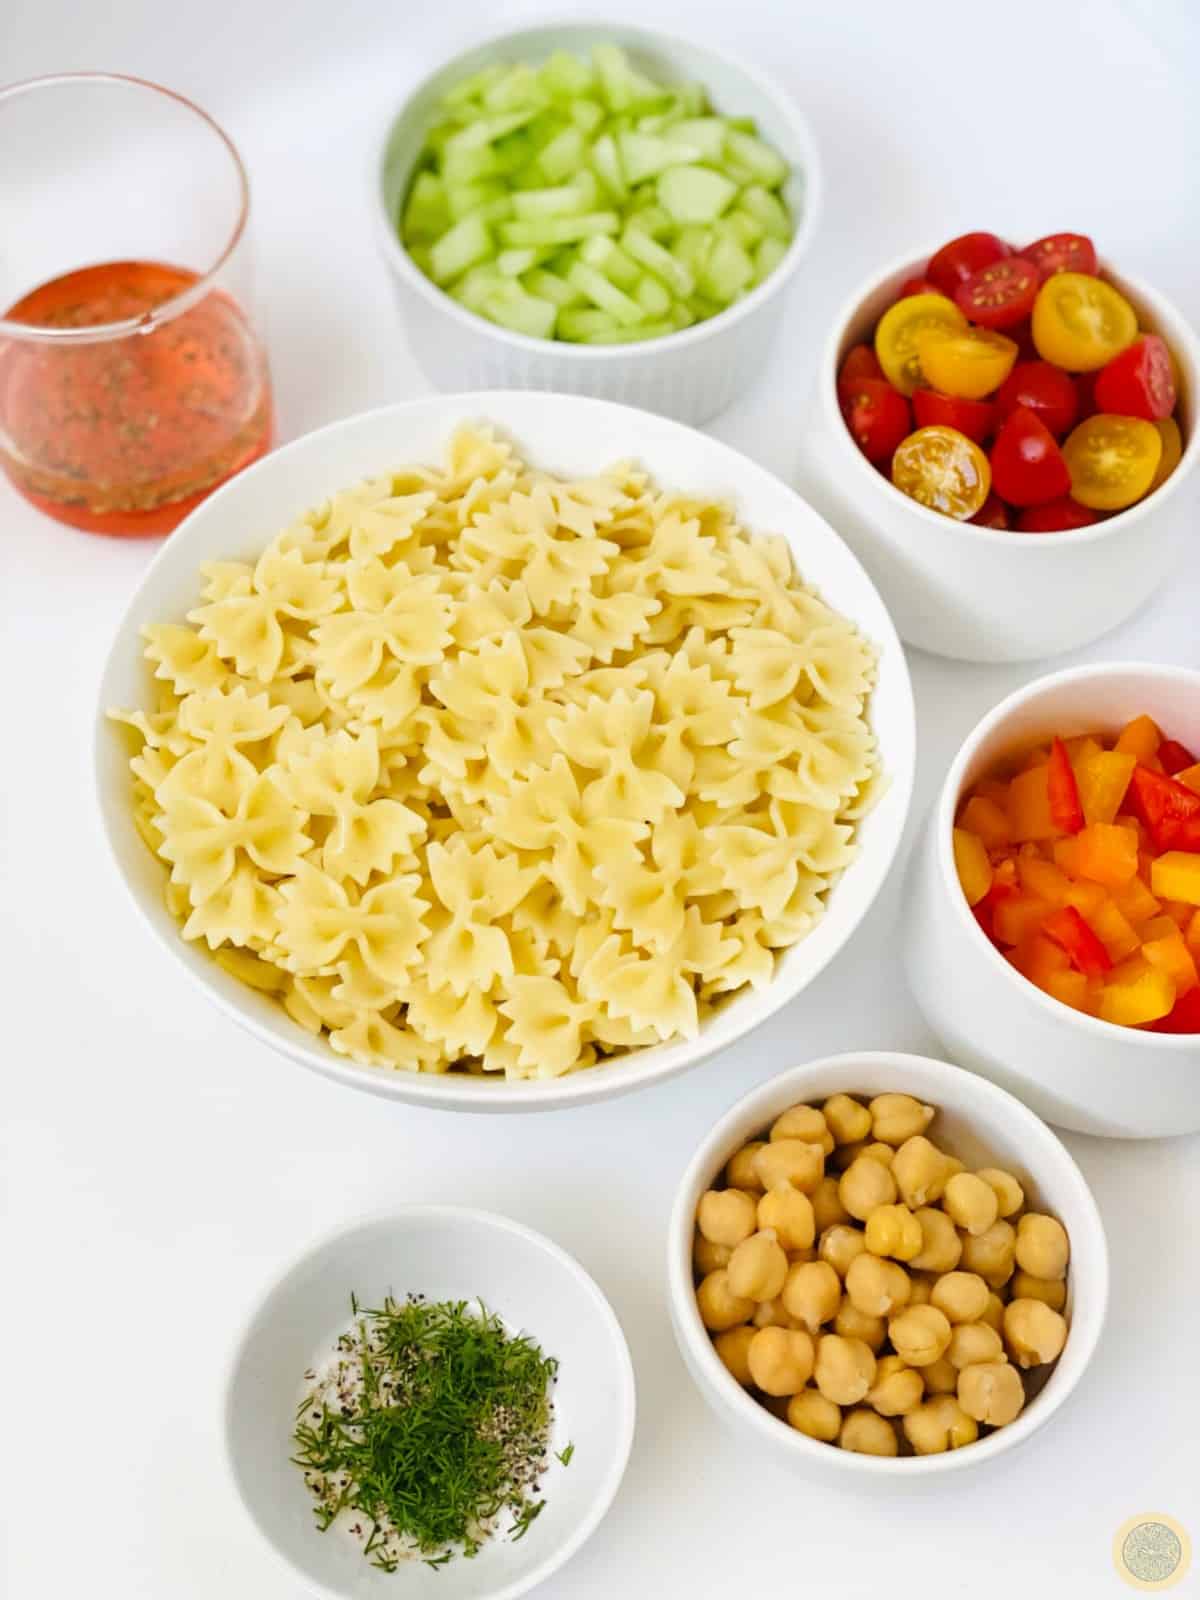 Ingredients you'll need for Bow Tie Pasta Salad: